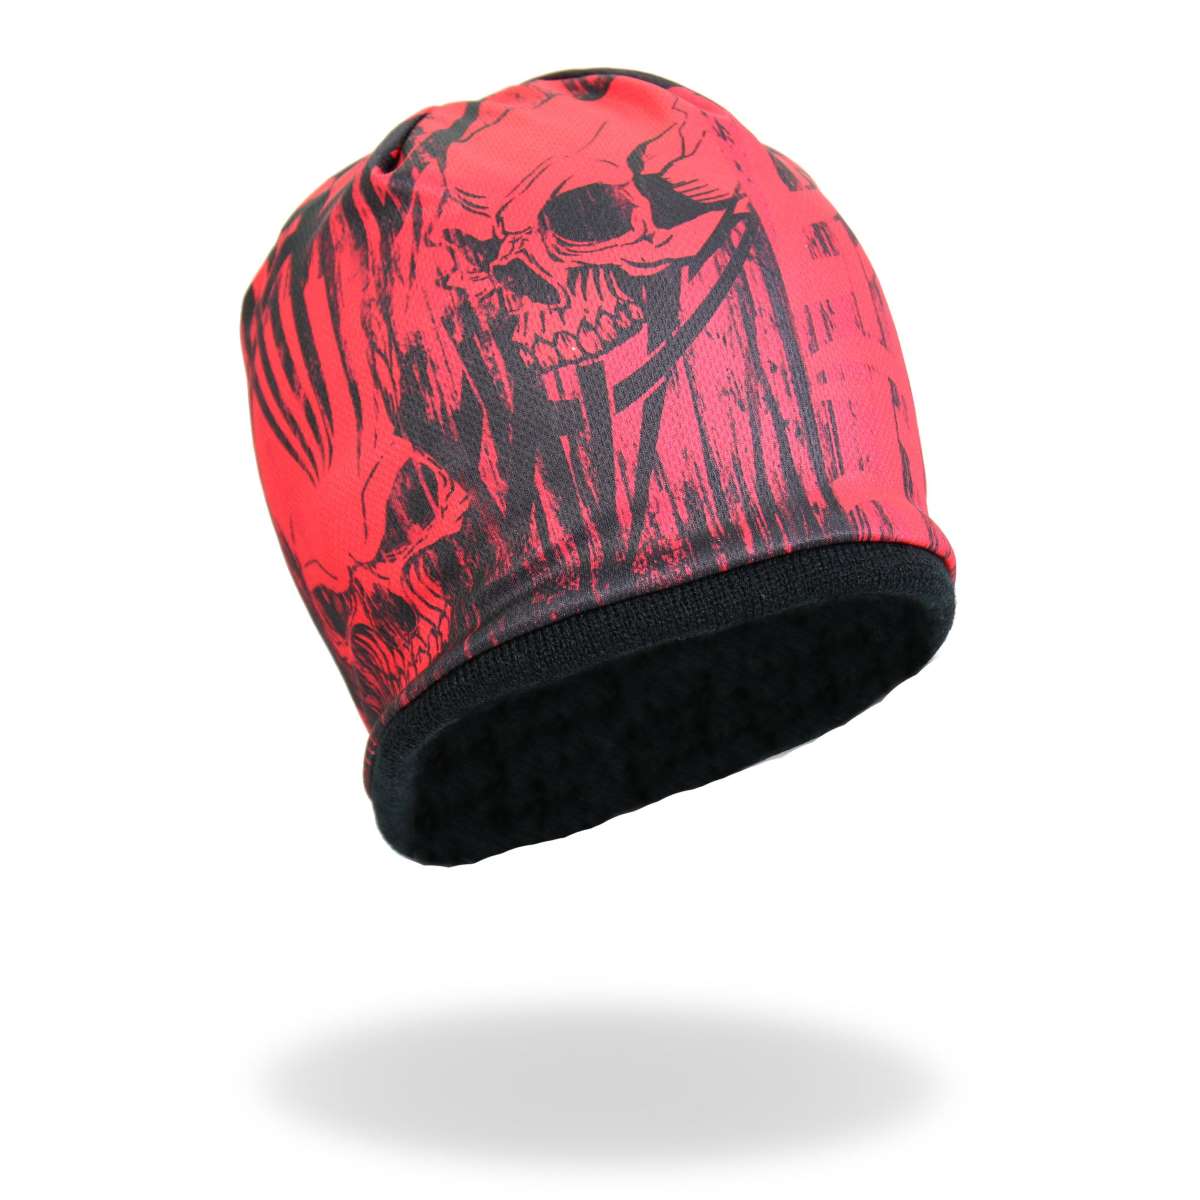 Hot Leathers Over The Top Skull Beanie KHC1016